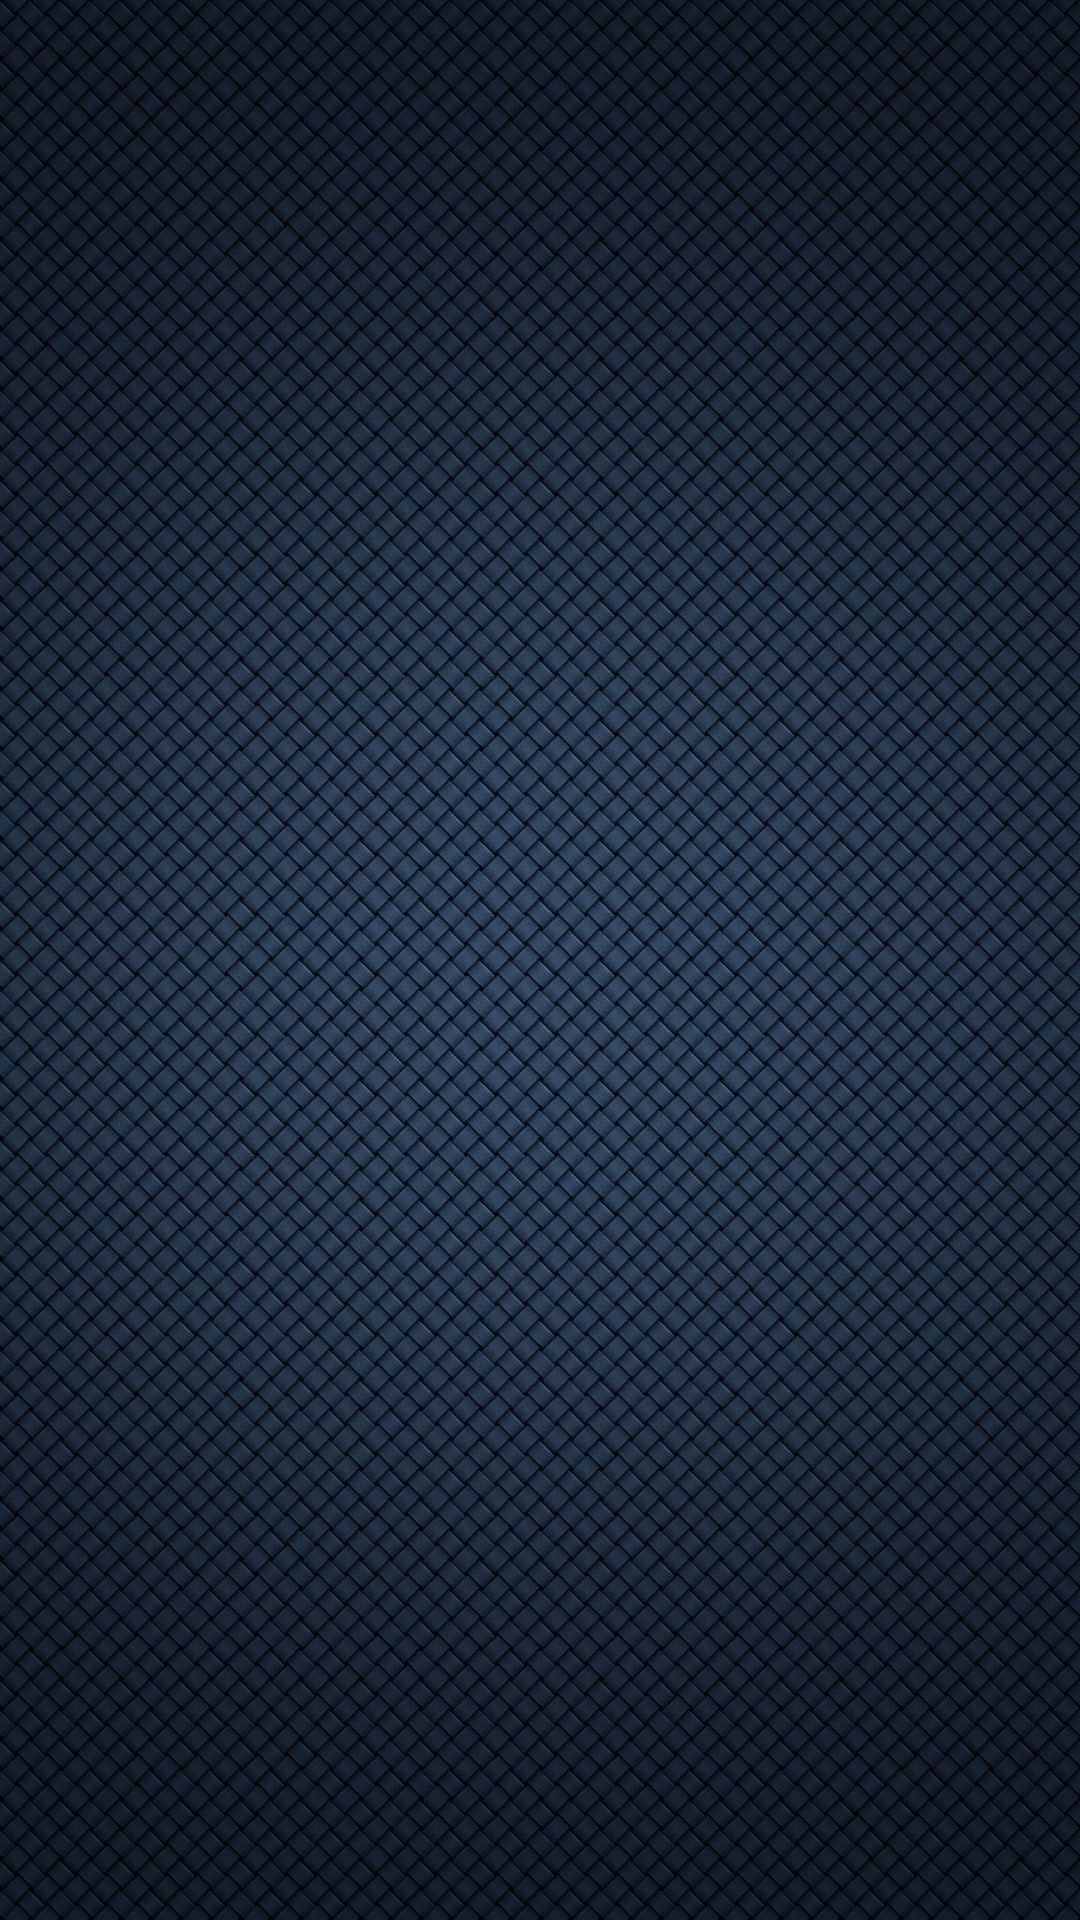 Wallpapers for Galaxy - Blue Linen Fabric Texture